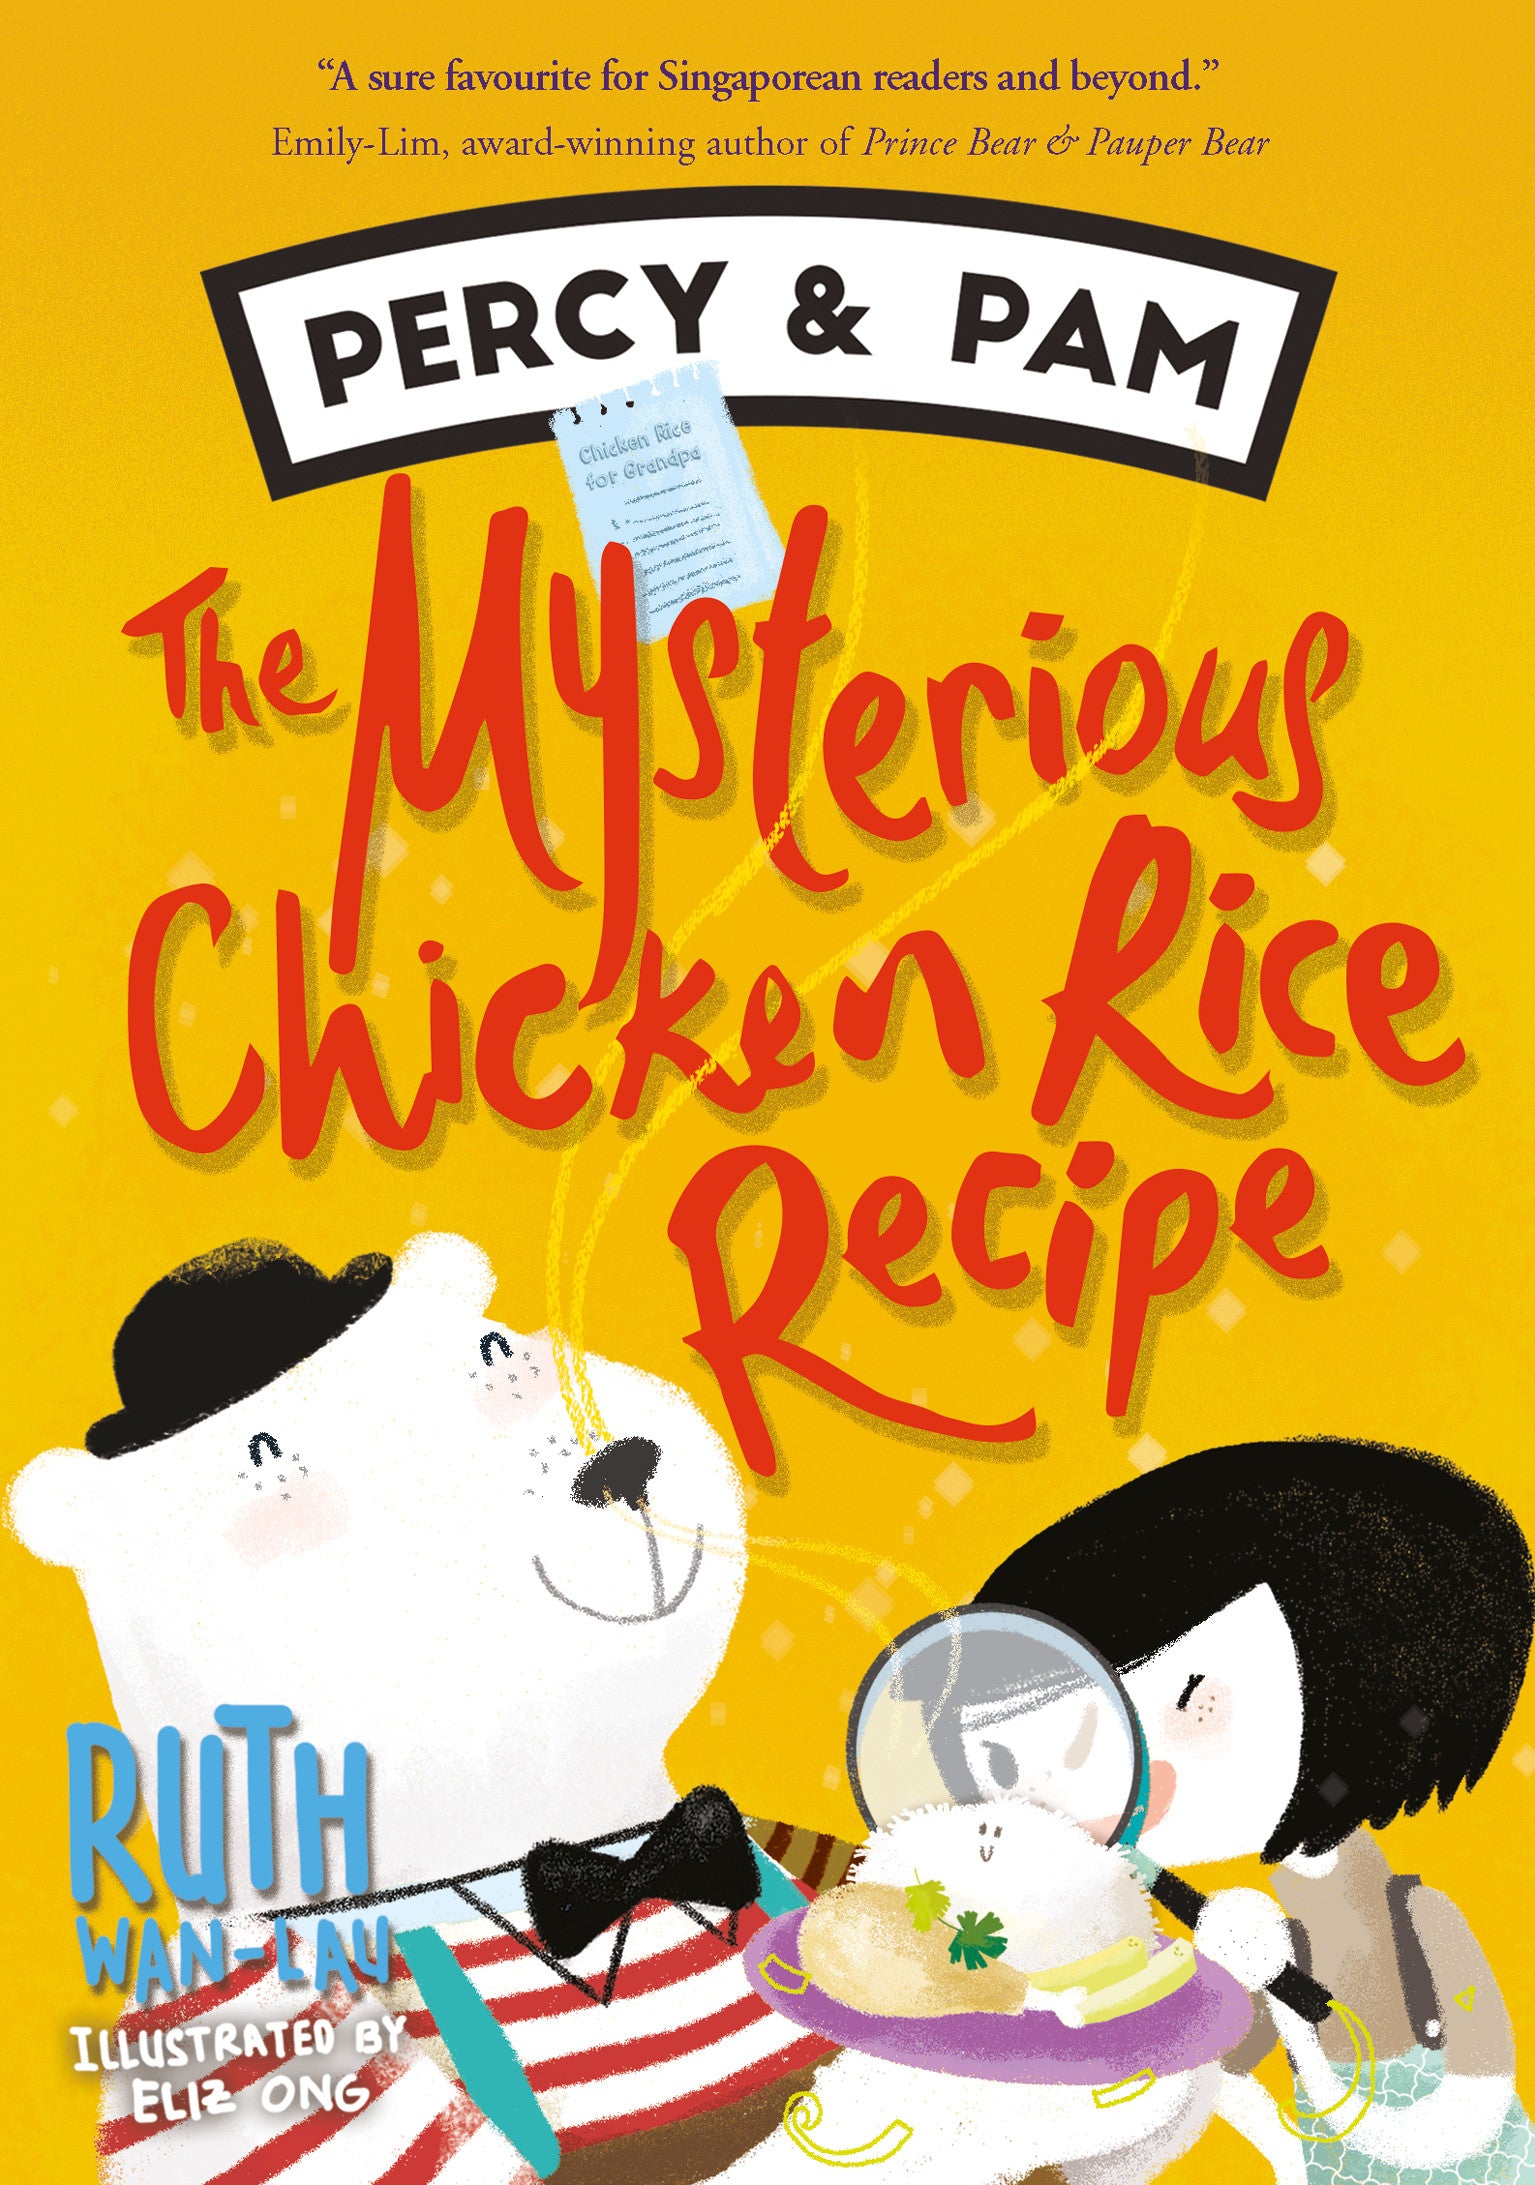 Percy and Pam: The Mysterious Chicken Rice Recipe (Book 2)